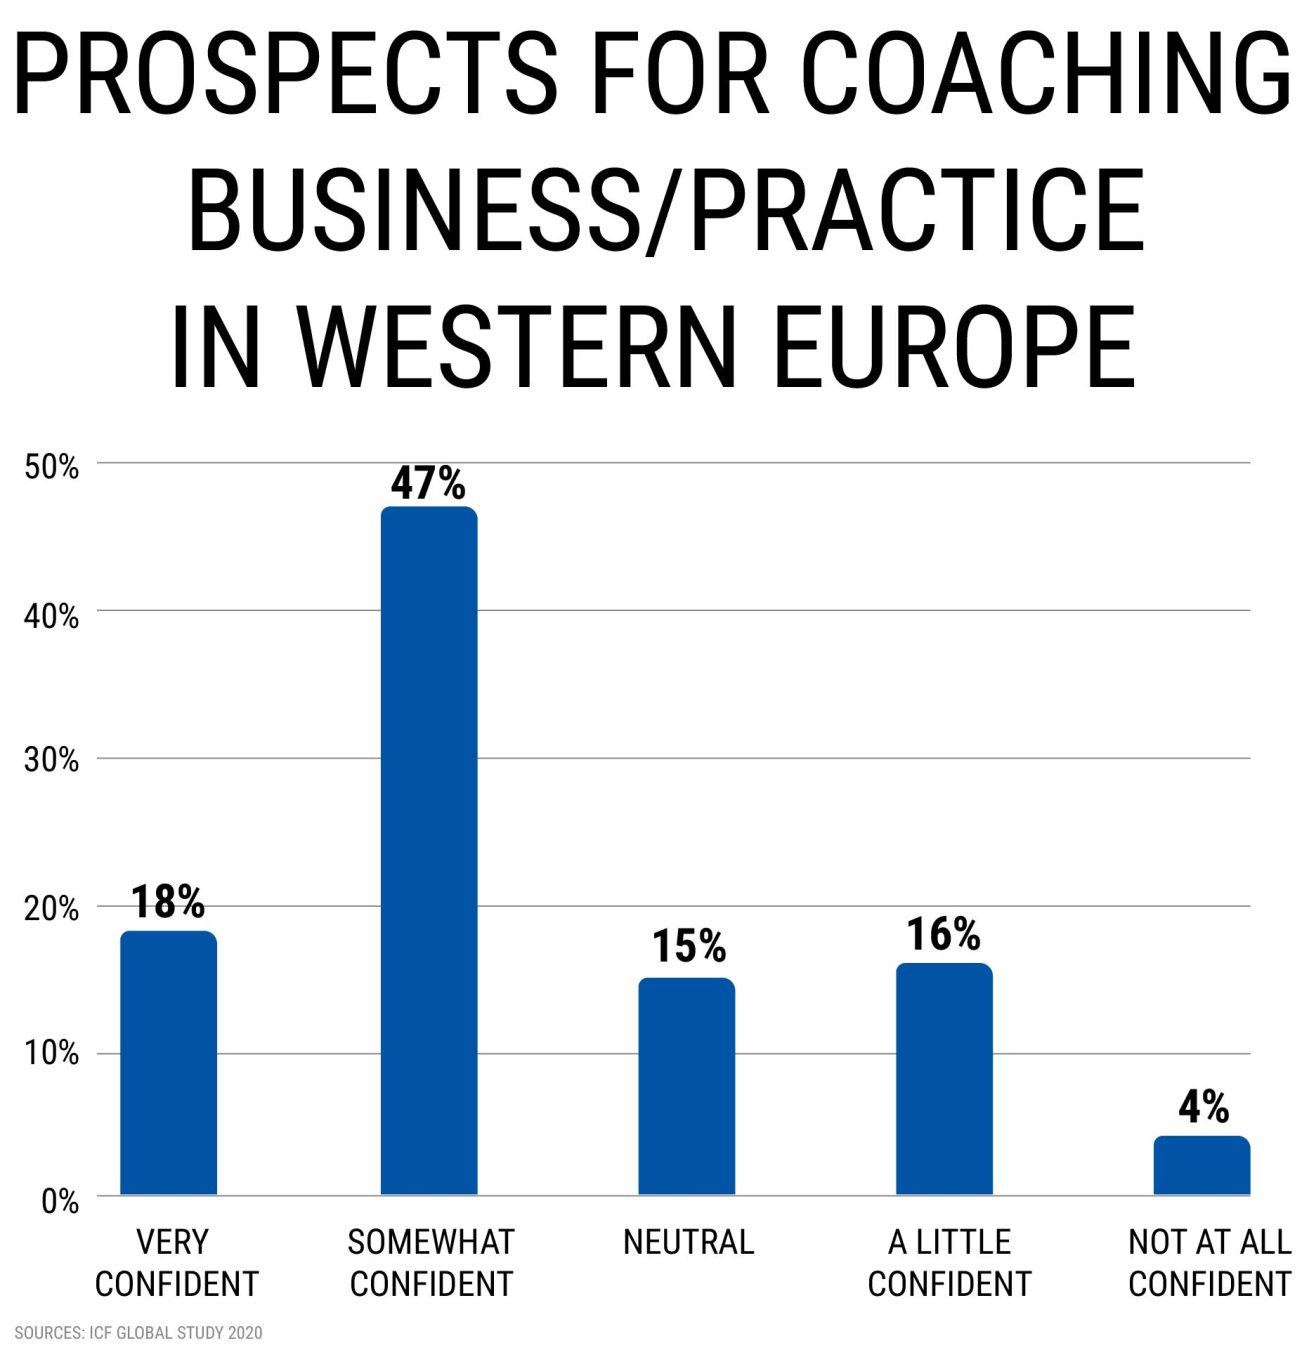 PROSPECTS FOR COACHING BUSINESS/PRACTICE IN WESTERN EUROPE